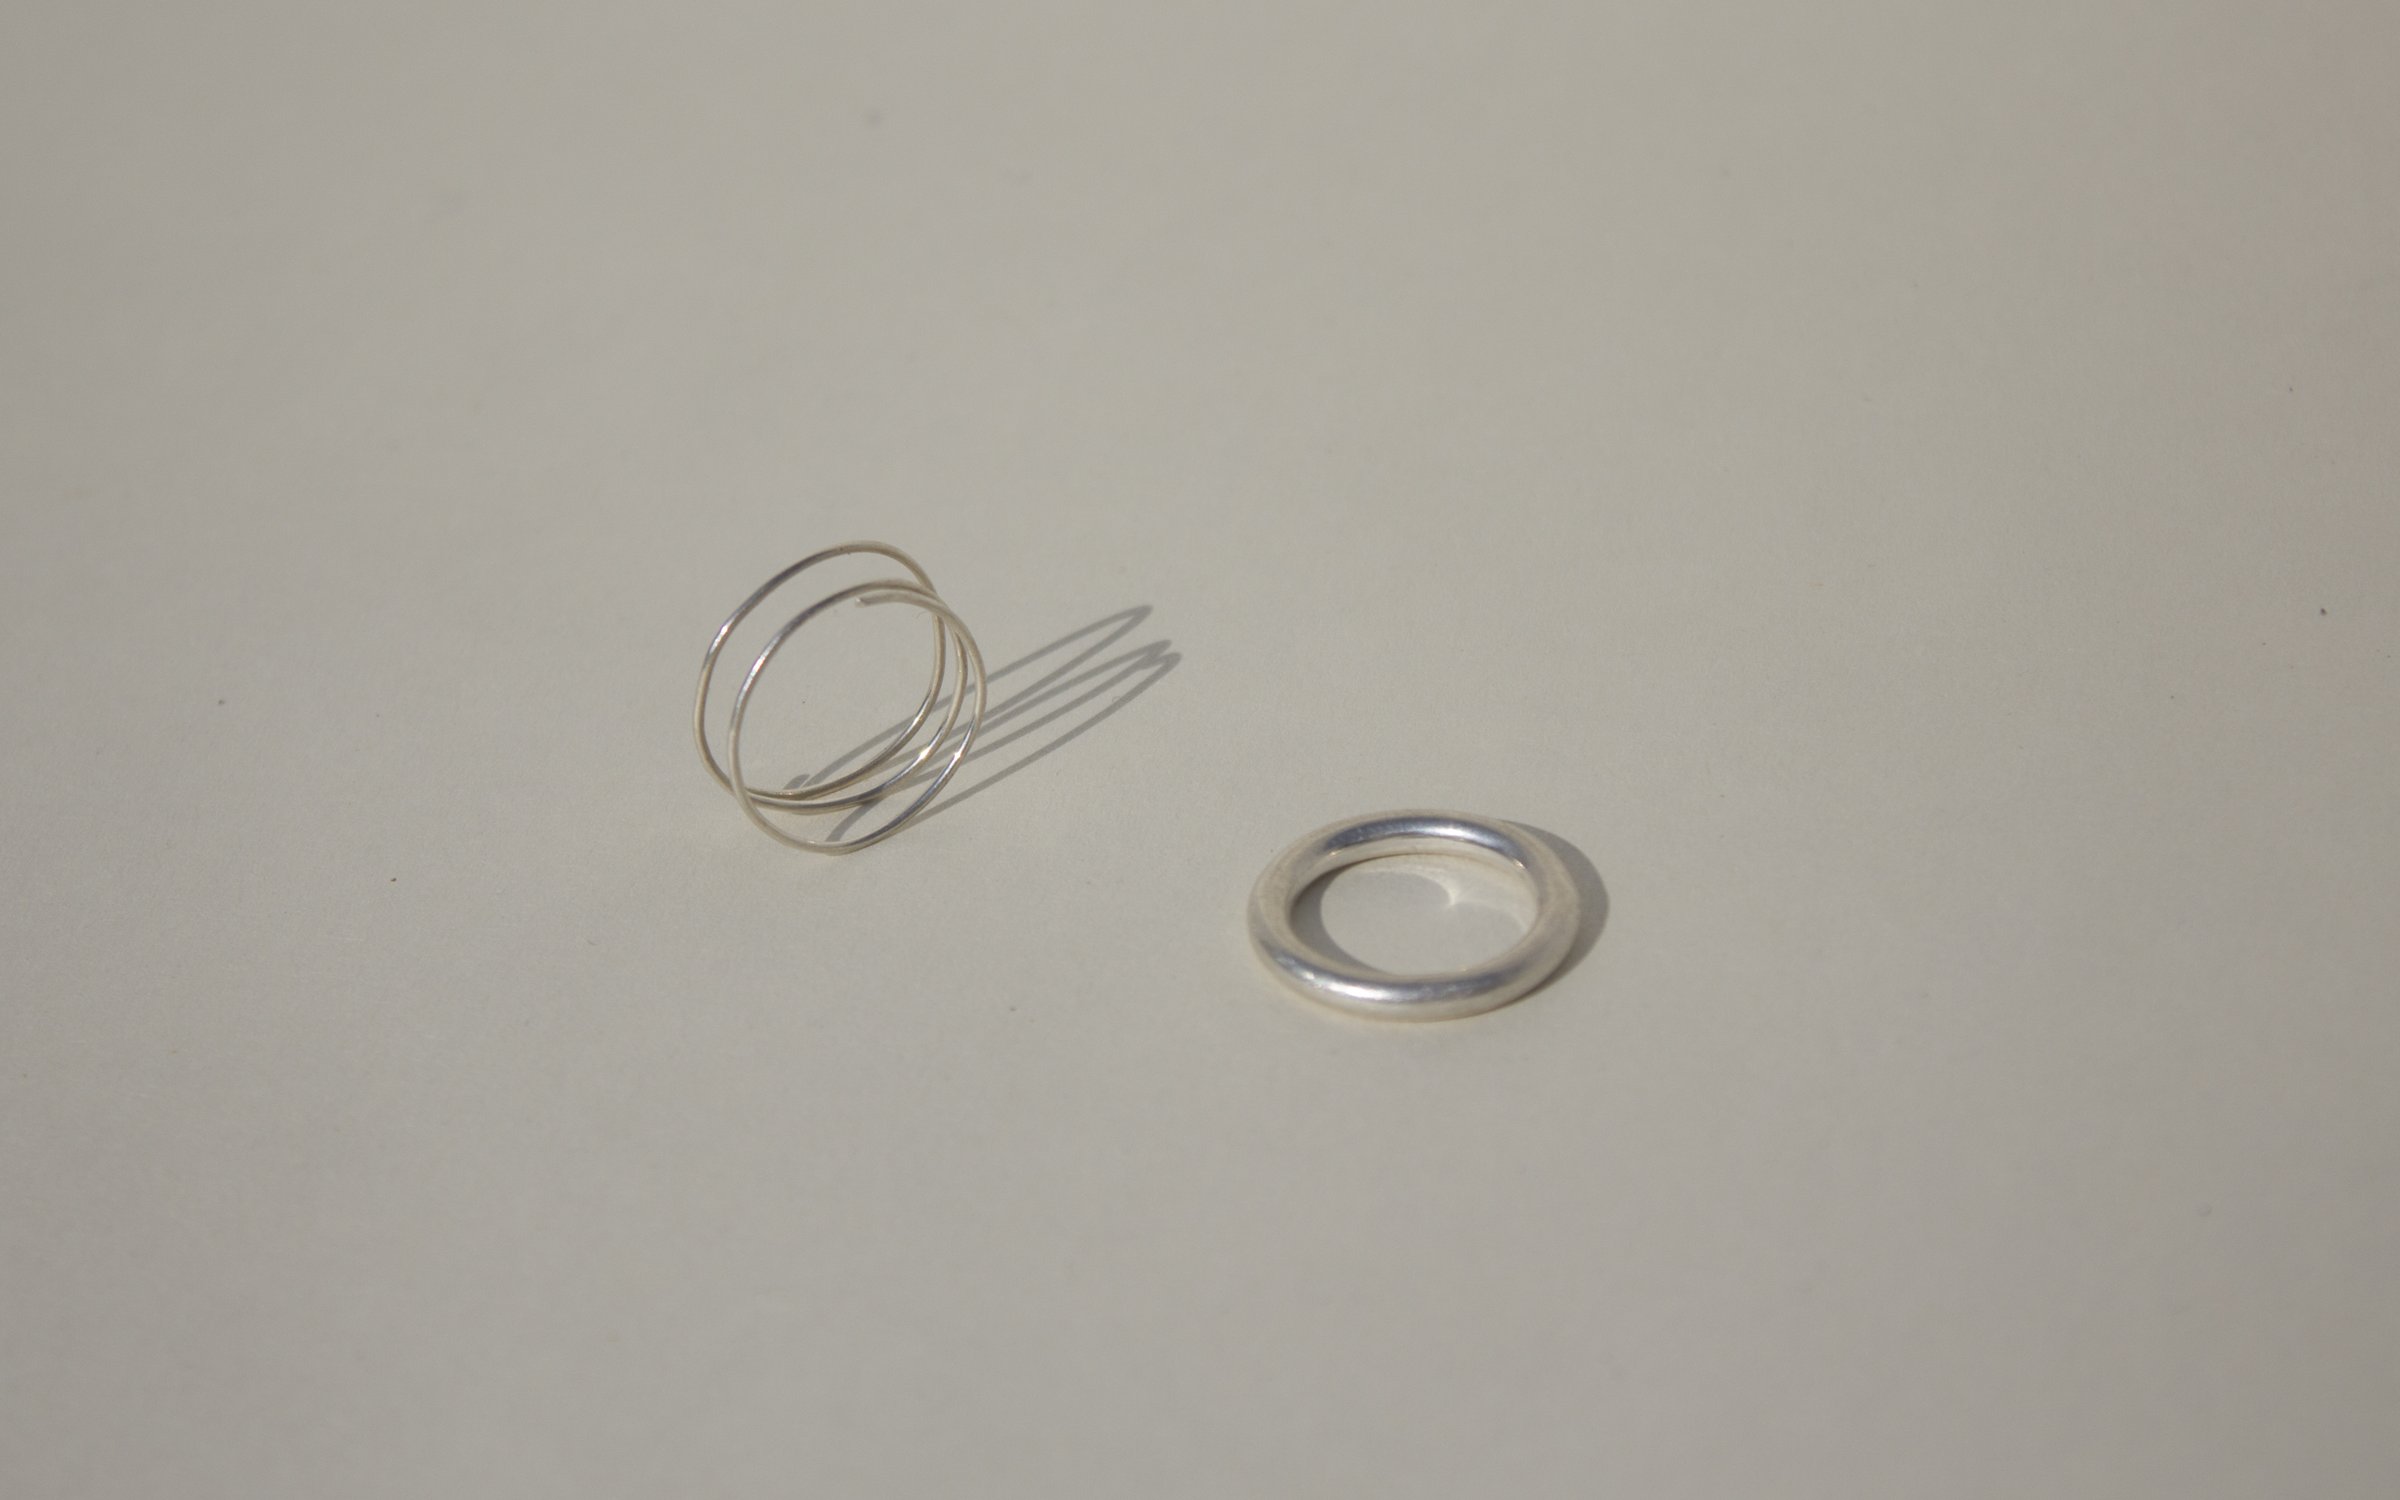 Image of Edition 2. Piece 1. Rings